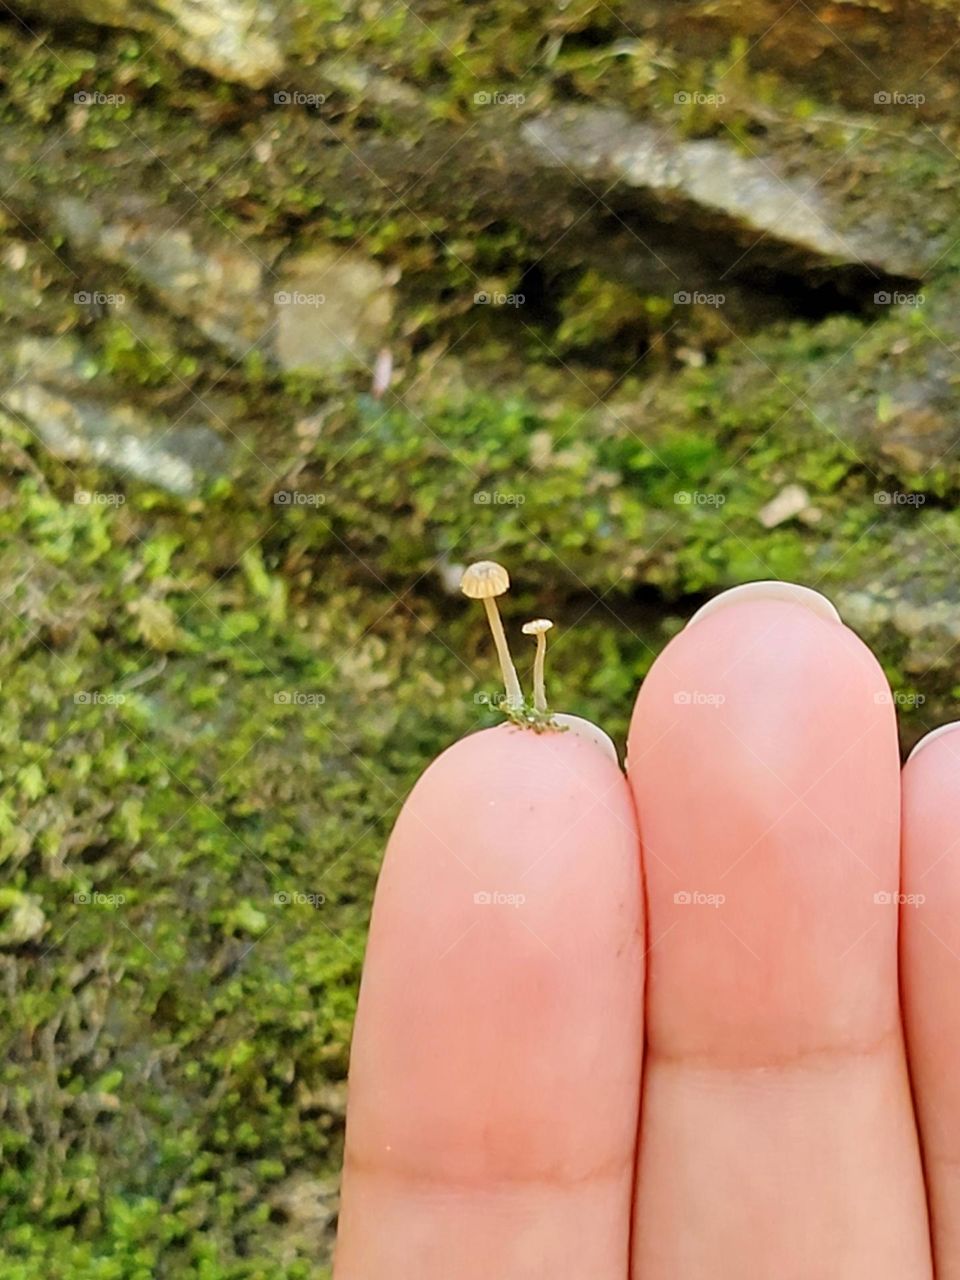 two small mushrooms on a fingertip